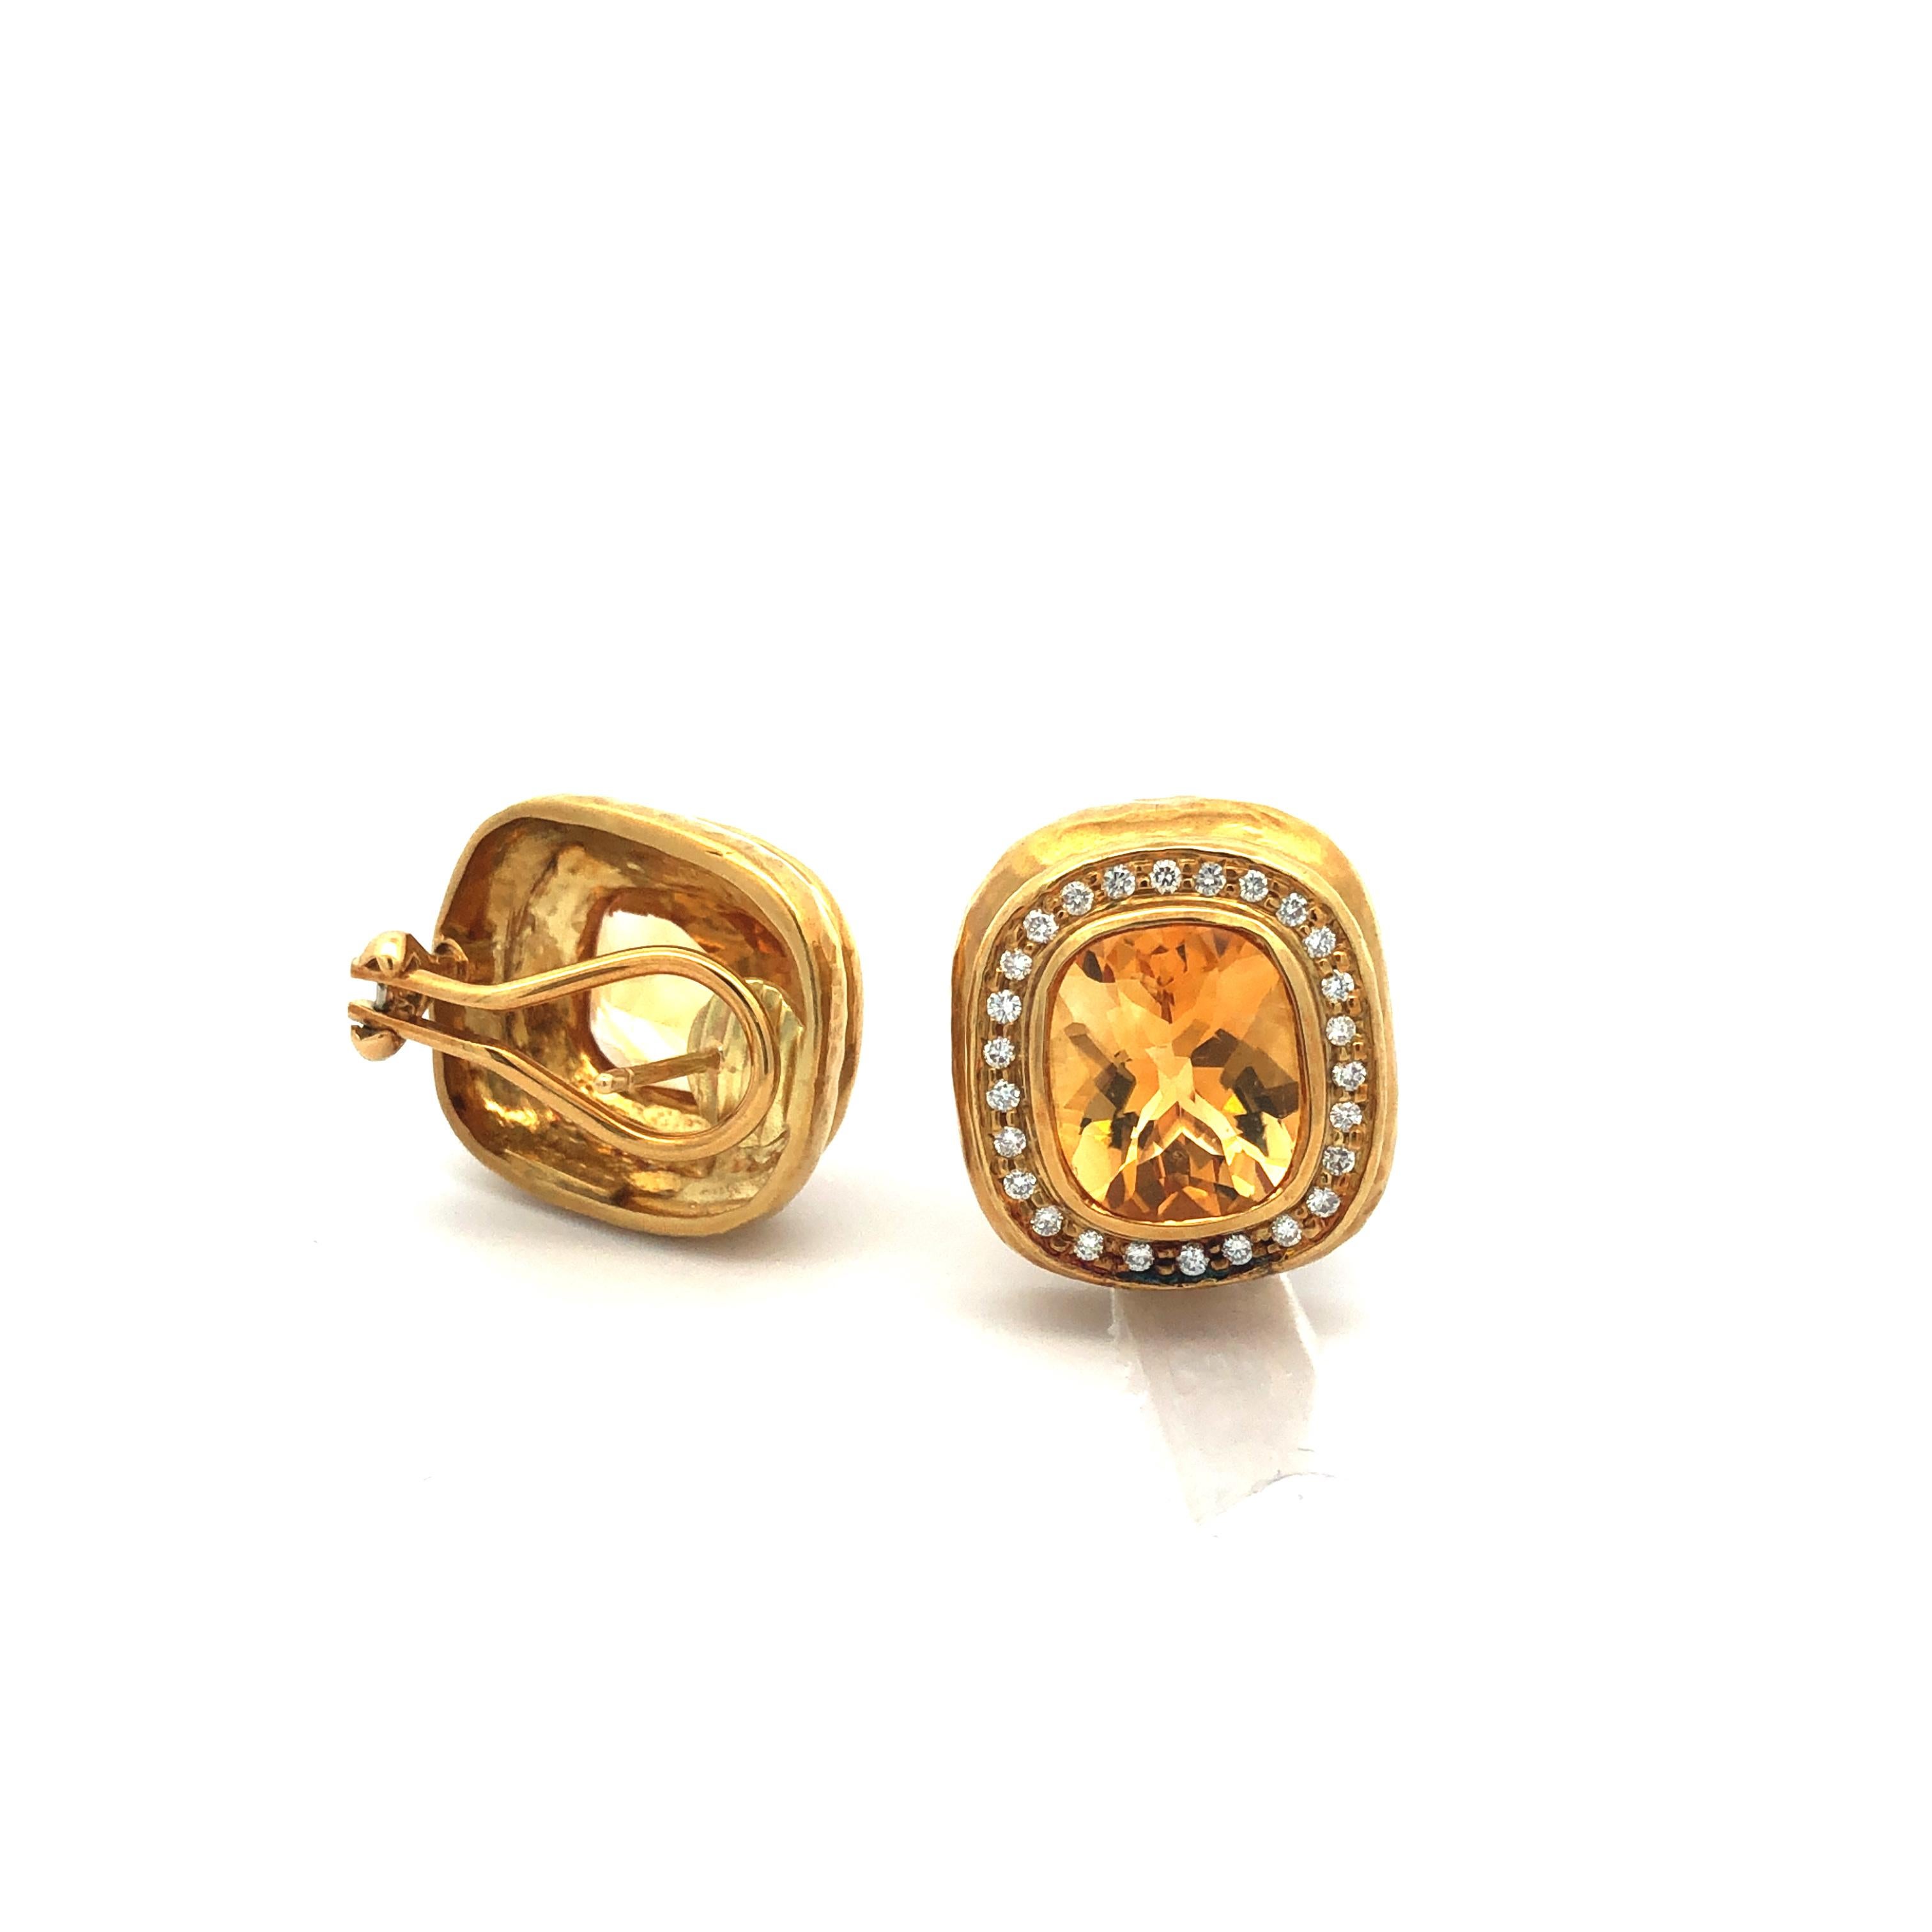 Elevate your style with these mesmerizing 18K yellow gold Seidengang earrings, featuring a stunning combination of citrine and diamonds.

At the center of each earring, a magnificent faceted cushion-cut citrine takes center stage, radiating warmth